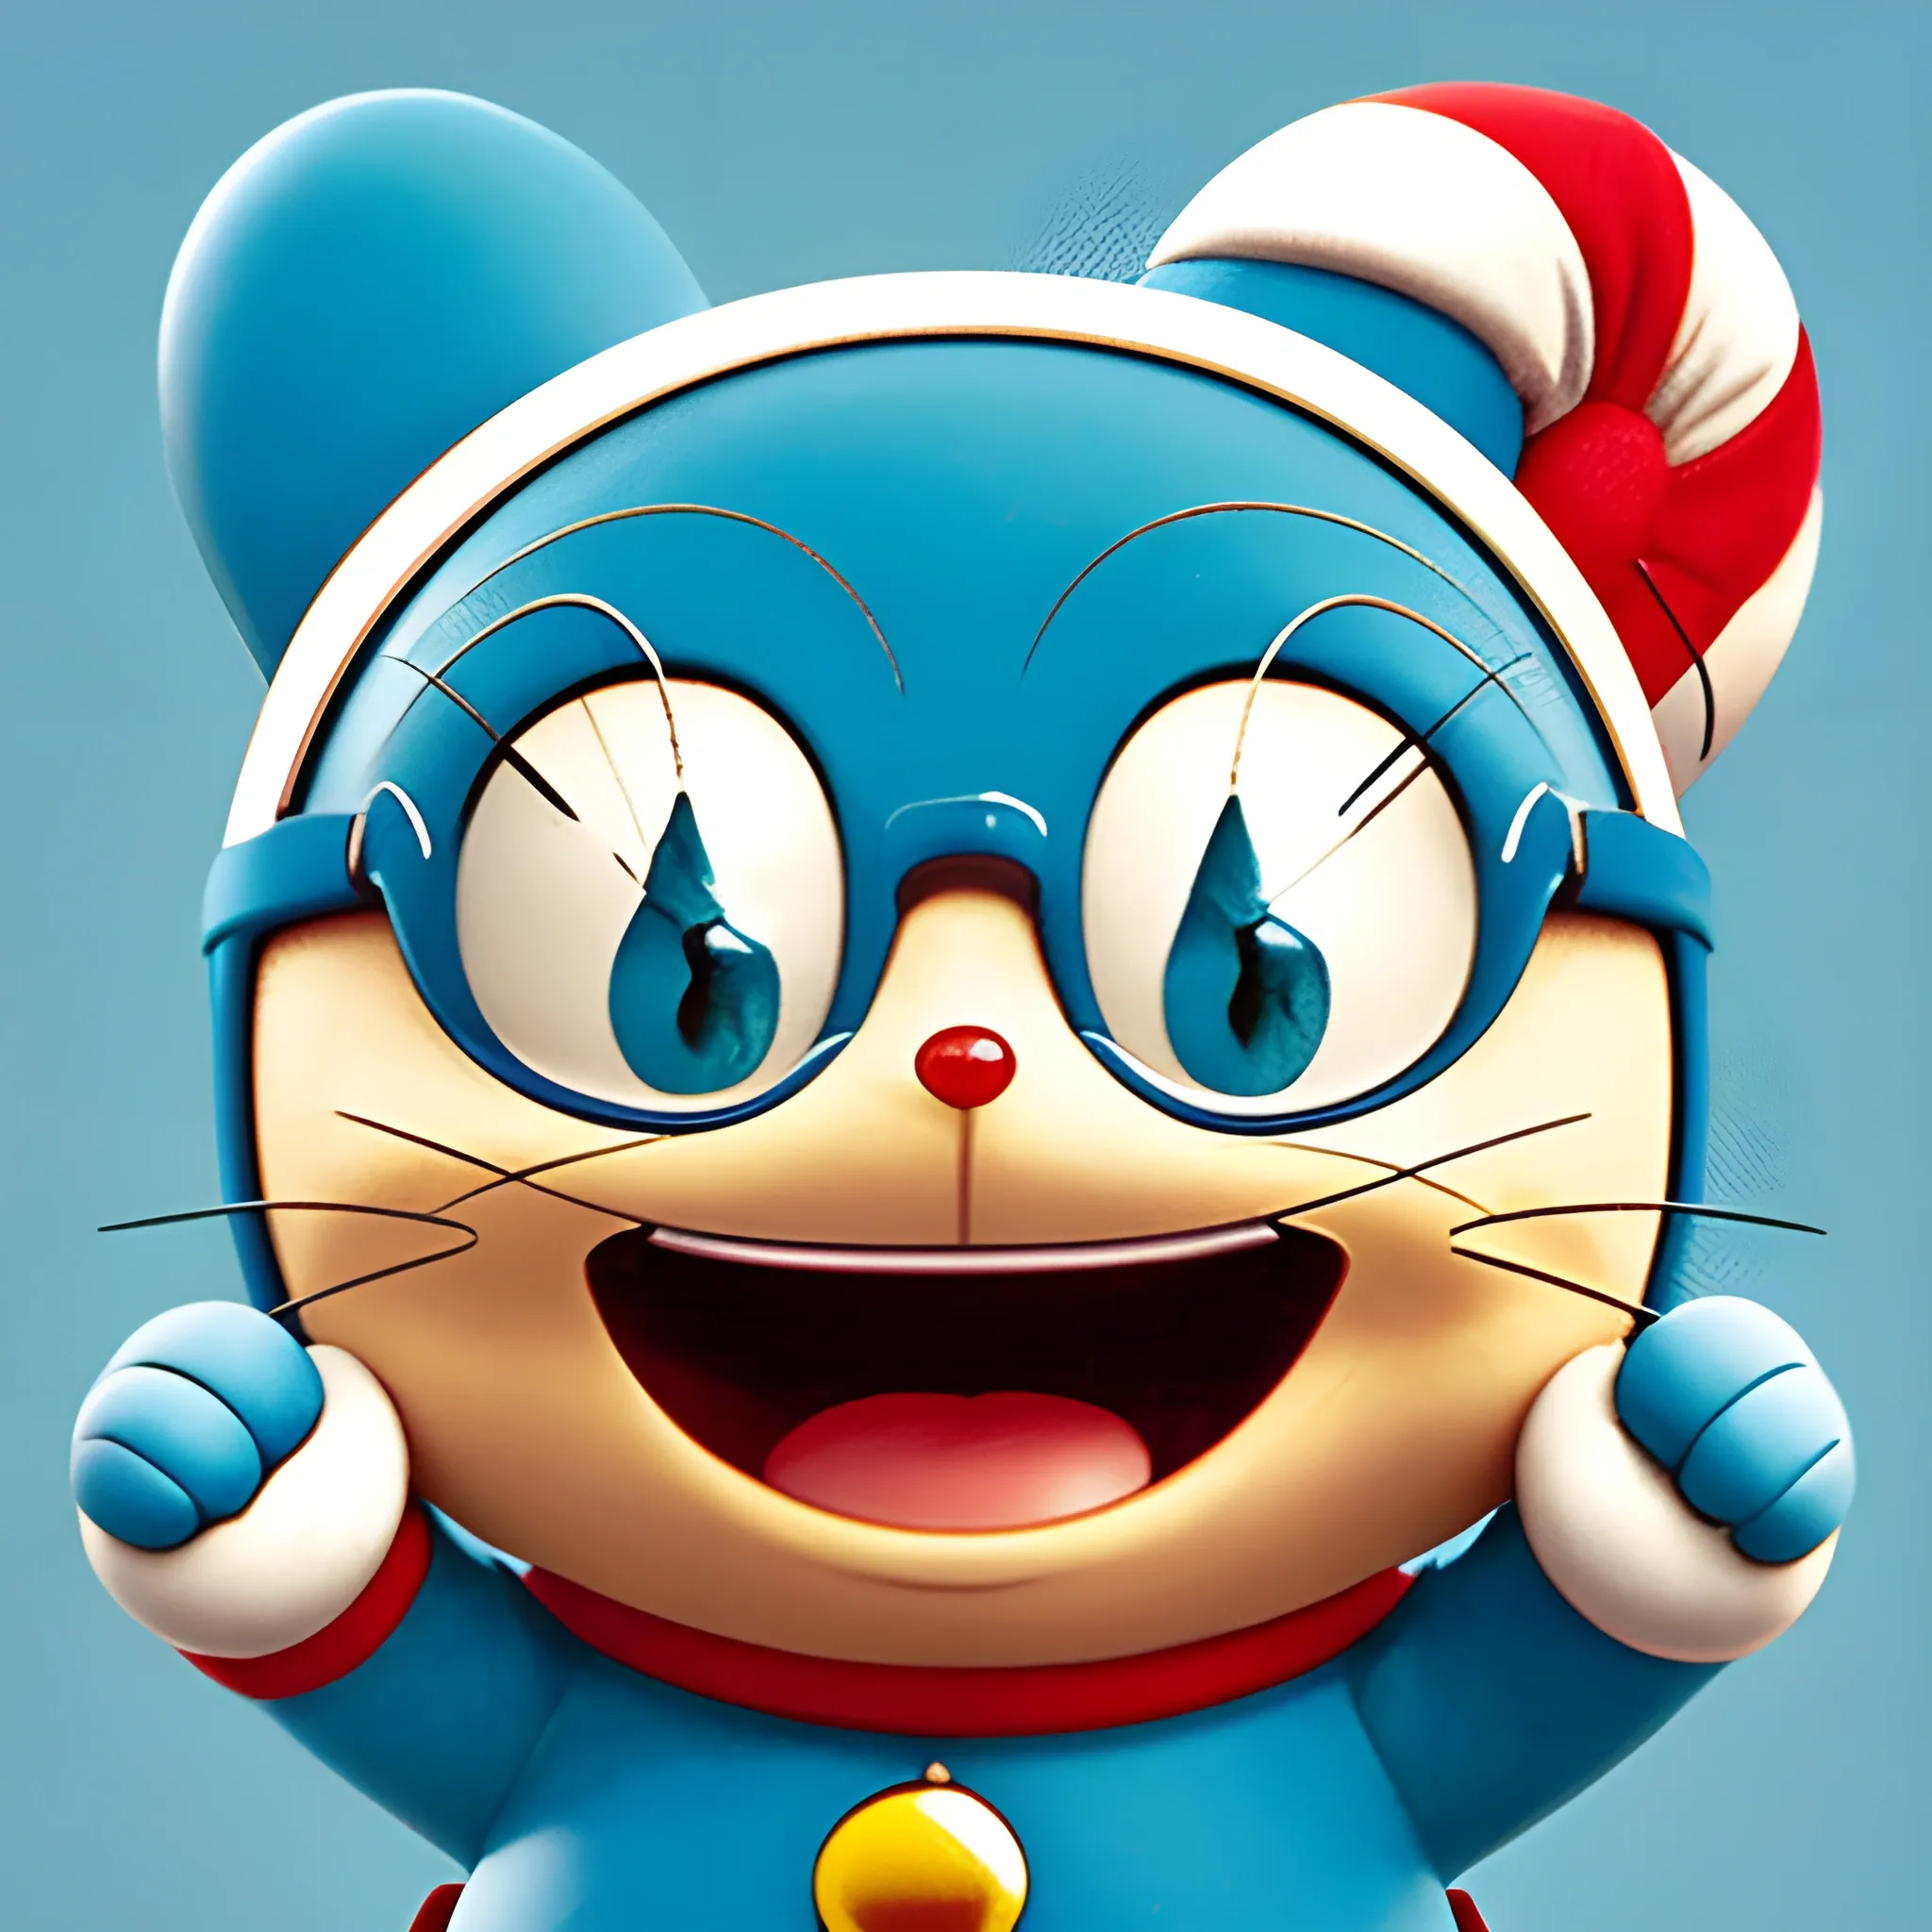 Generate an 8K image of Doraemon, the famous cartoon character ...